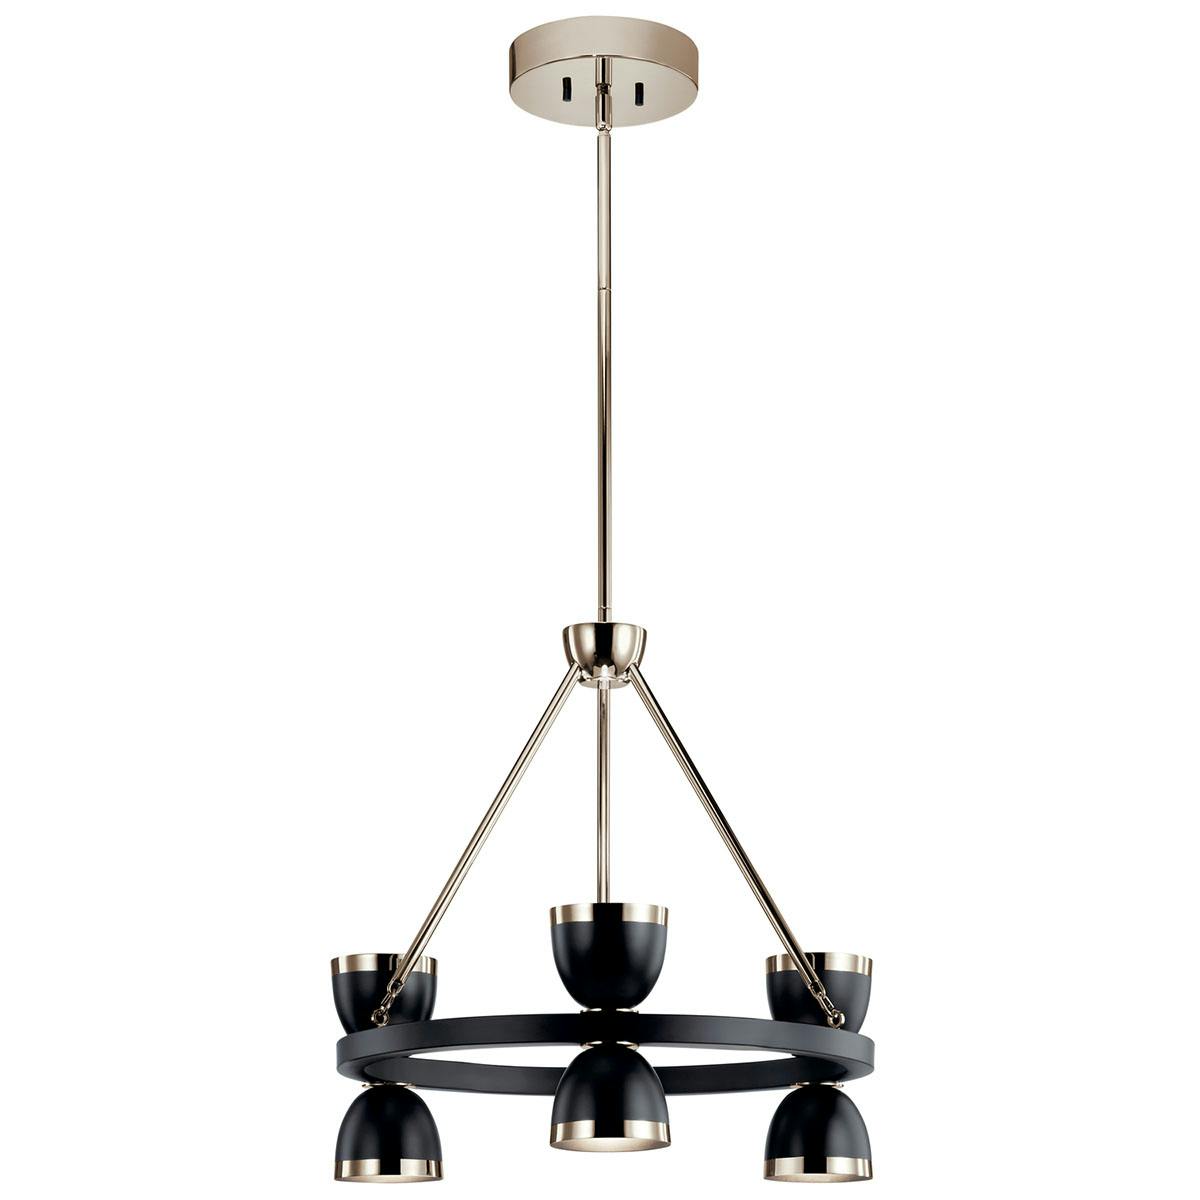 Baland 22" Chandelier Black and Nickel on a white background